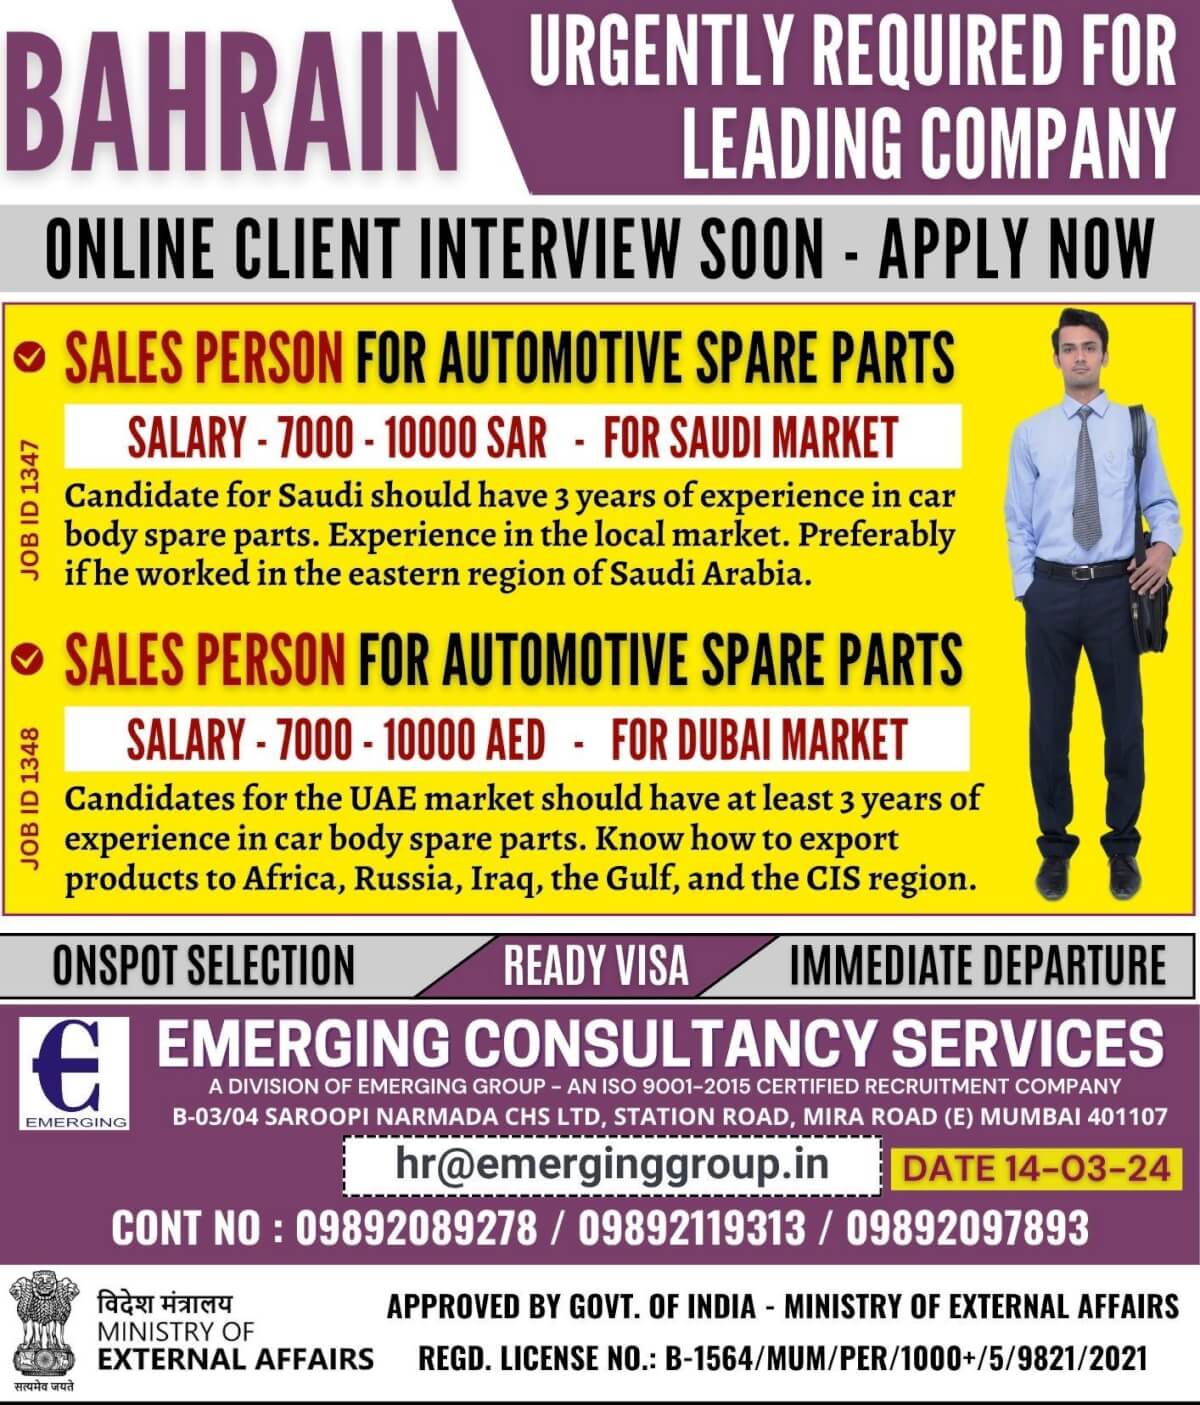 URGENLTY REQUIRED FOR LEADING COMPANY IN BAHRAIN - ONLINE CLIENT INTERVIEW SOON - APPLY NOW